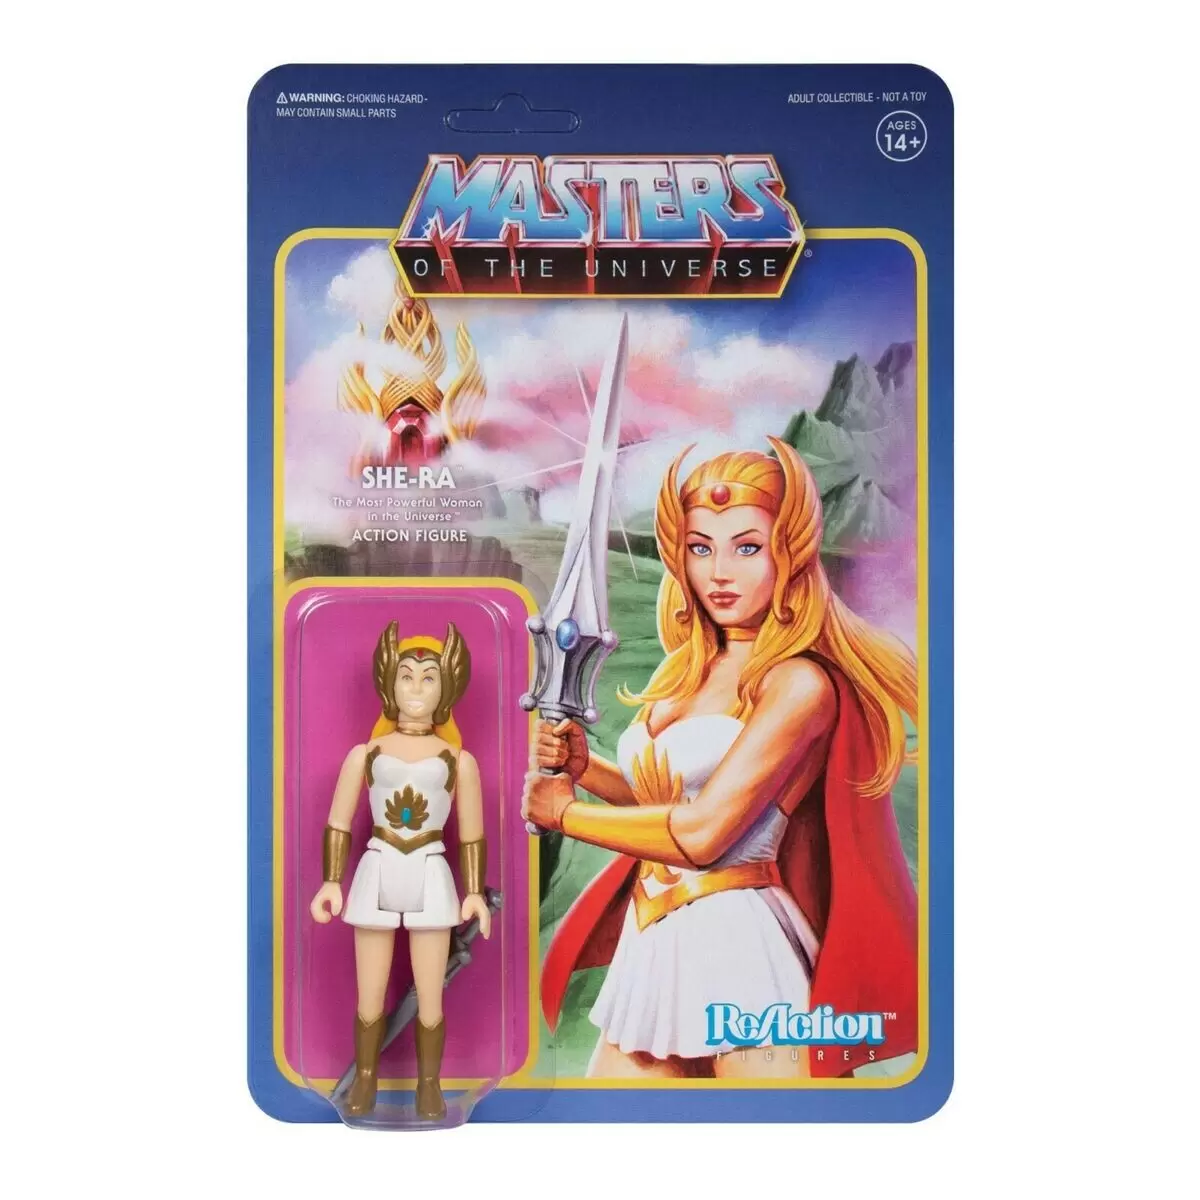 Super7 - Masters of the Universe - Reaction - She-Ra